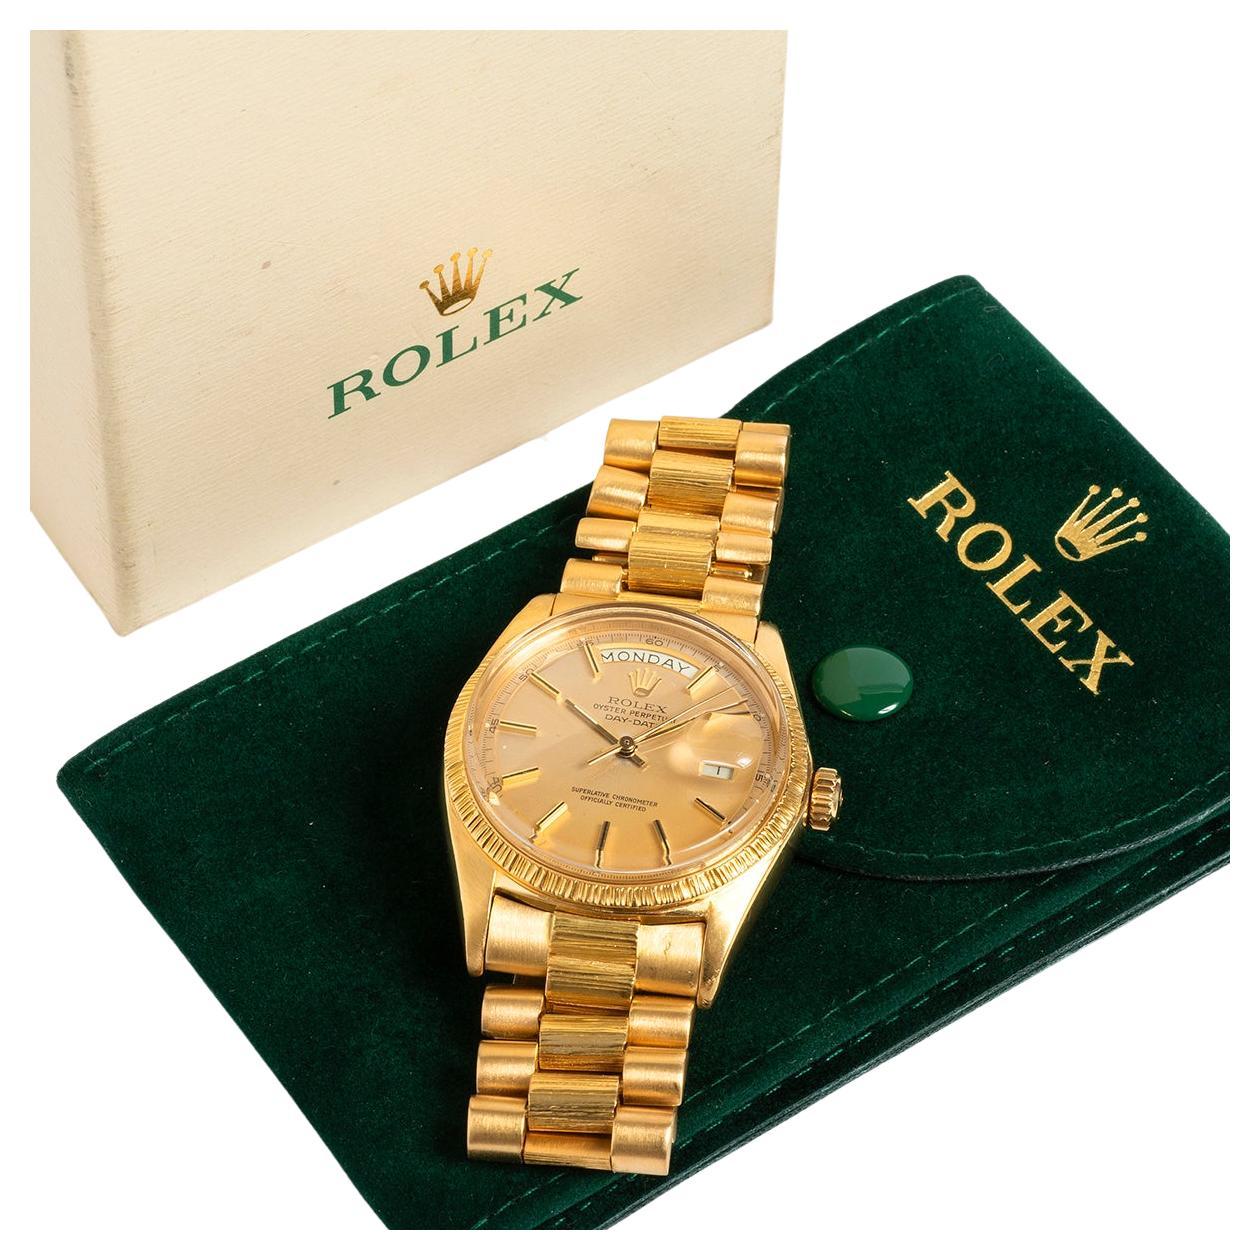 Our vintage Rolex Day-Date 1807, is the rarer bark finished reference of a day date: and is a highly original example, featuring an 18k yellow gold case with bark bezel and president bracelet with bark centre links and adjustable folding clasp. Also